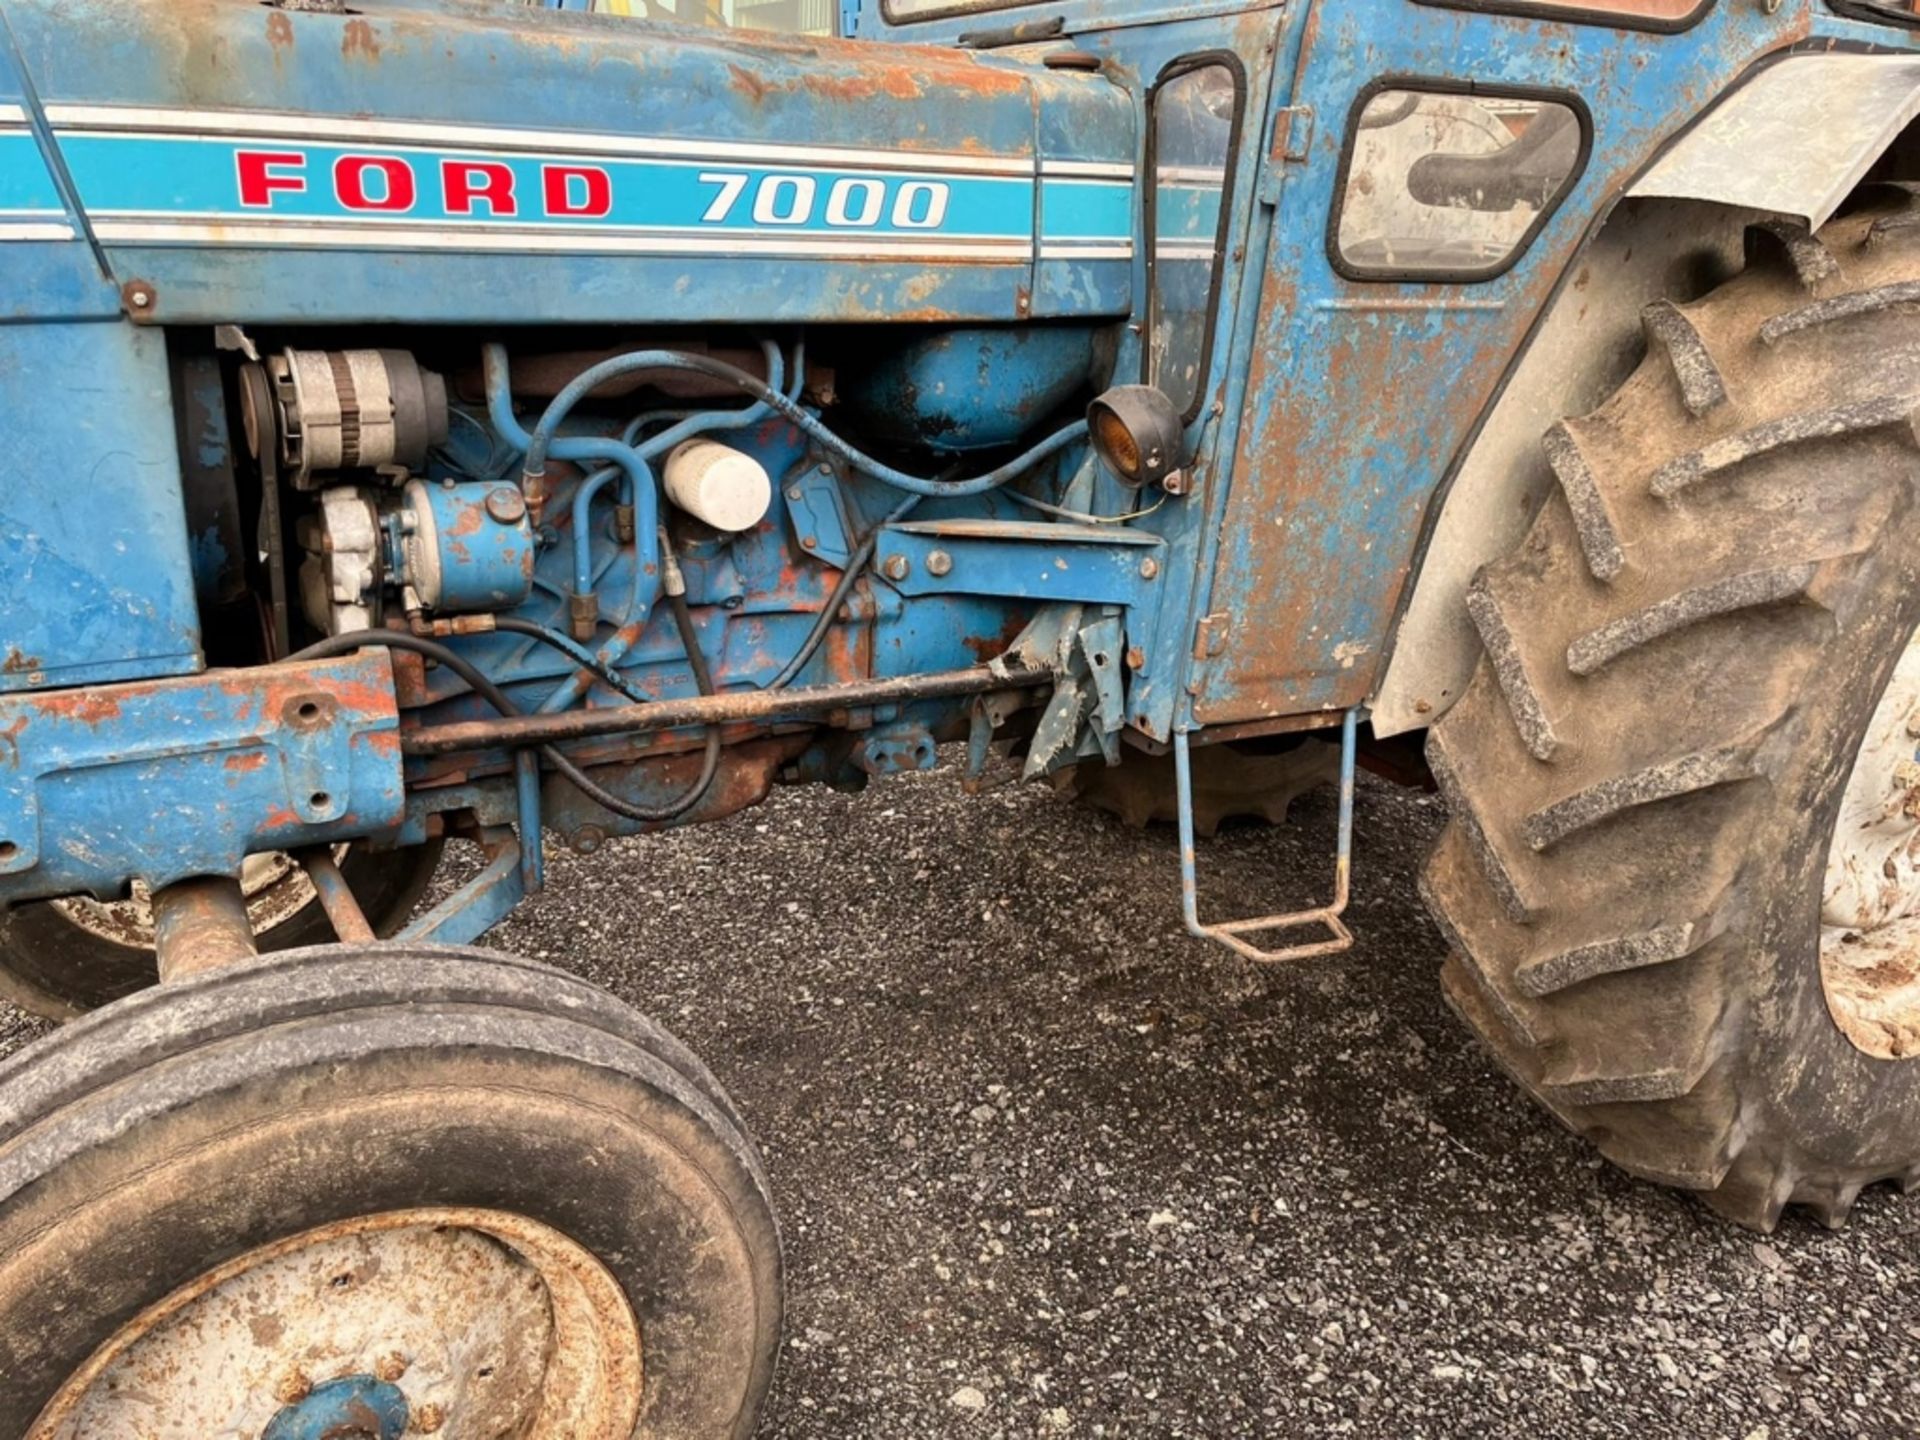 VINTAGE FORD TRACTOR 7000 - Image 7 of 10